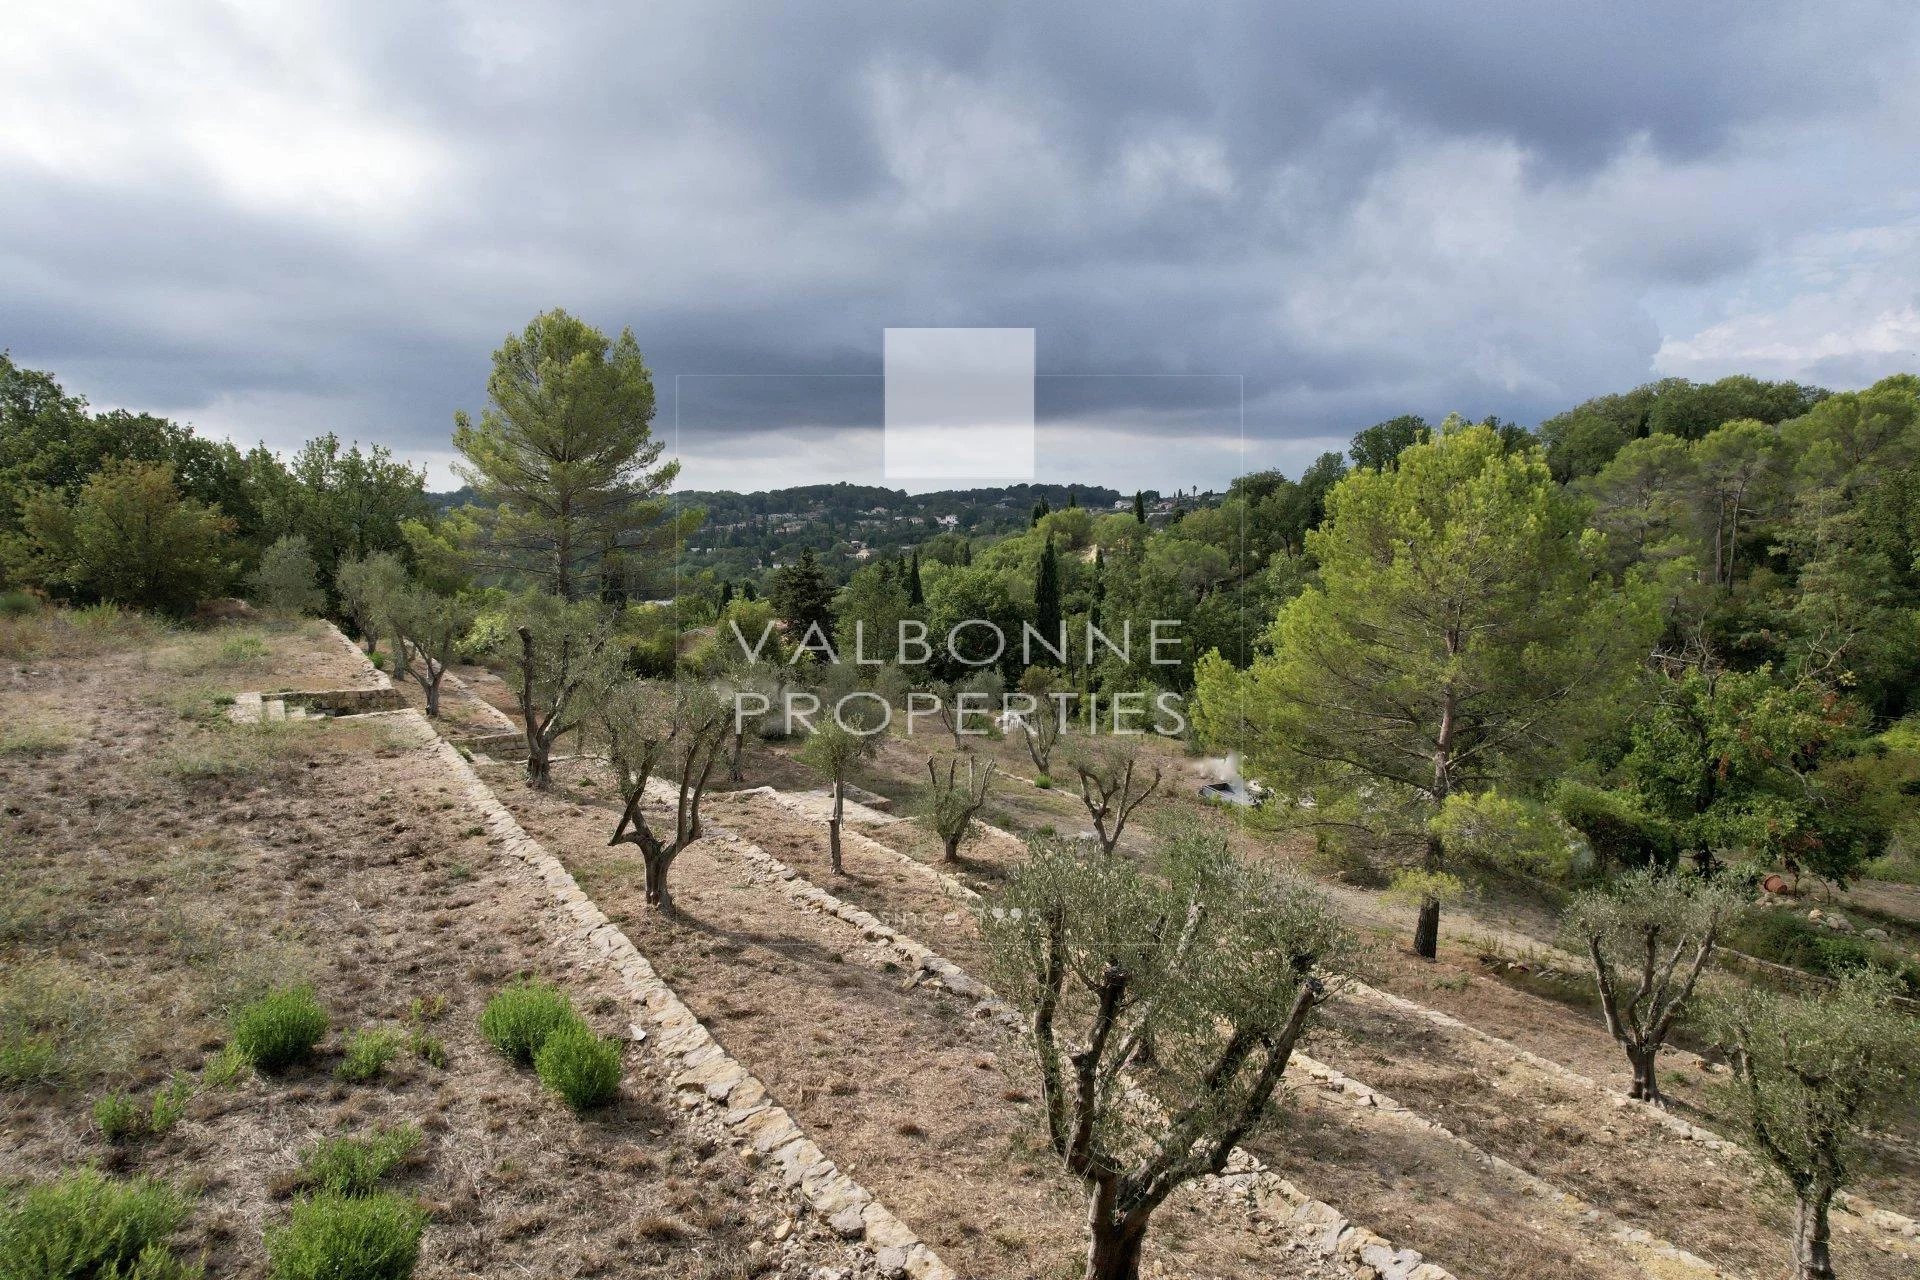 Superb 1 hectare plot within walking distance of the village